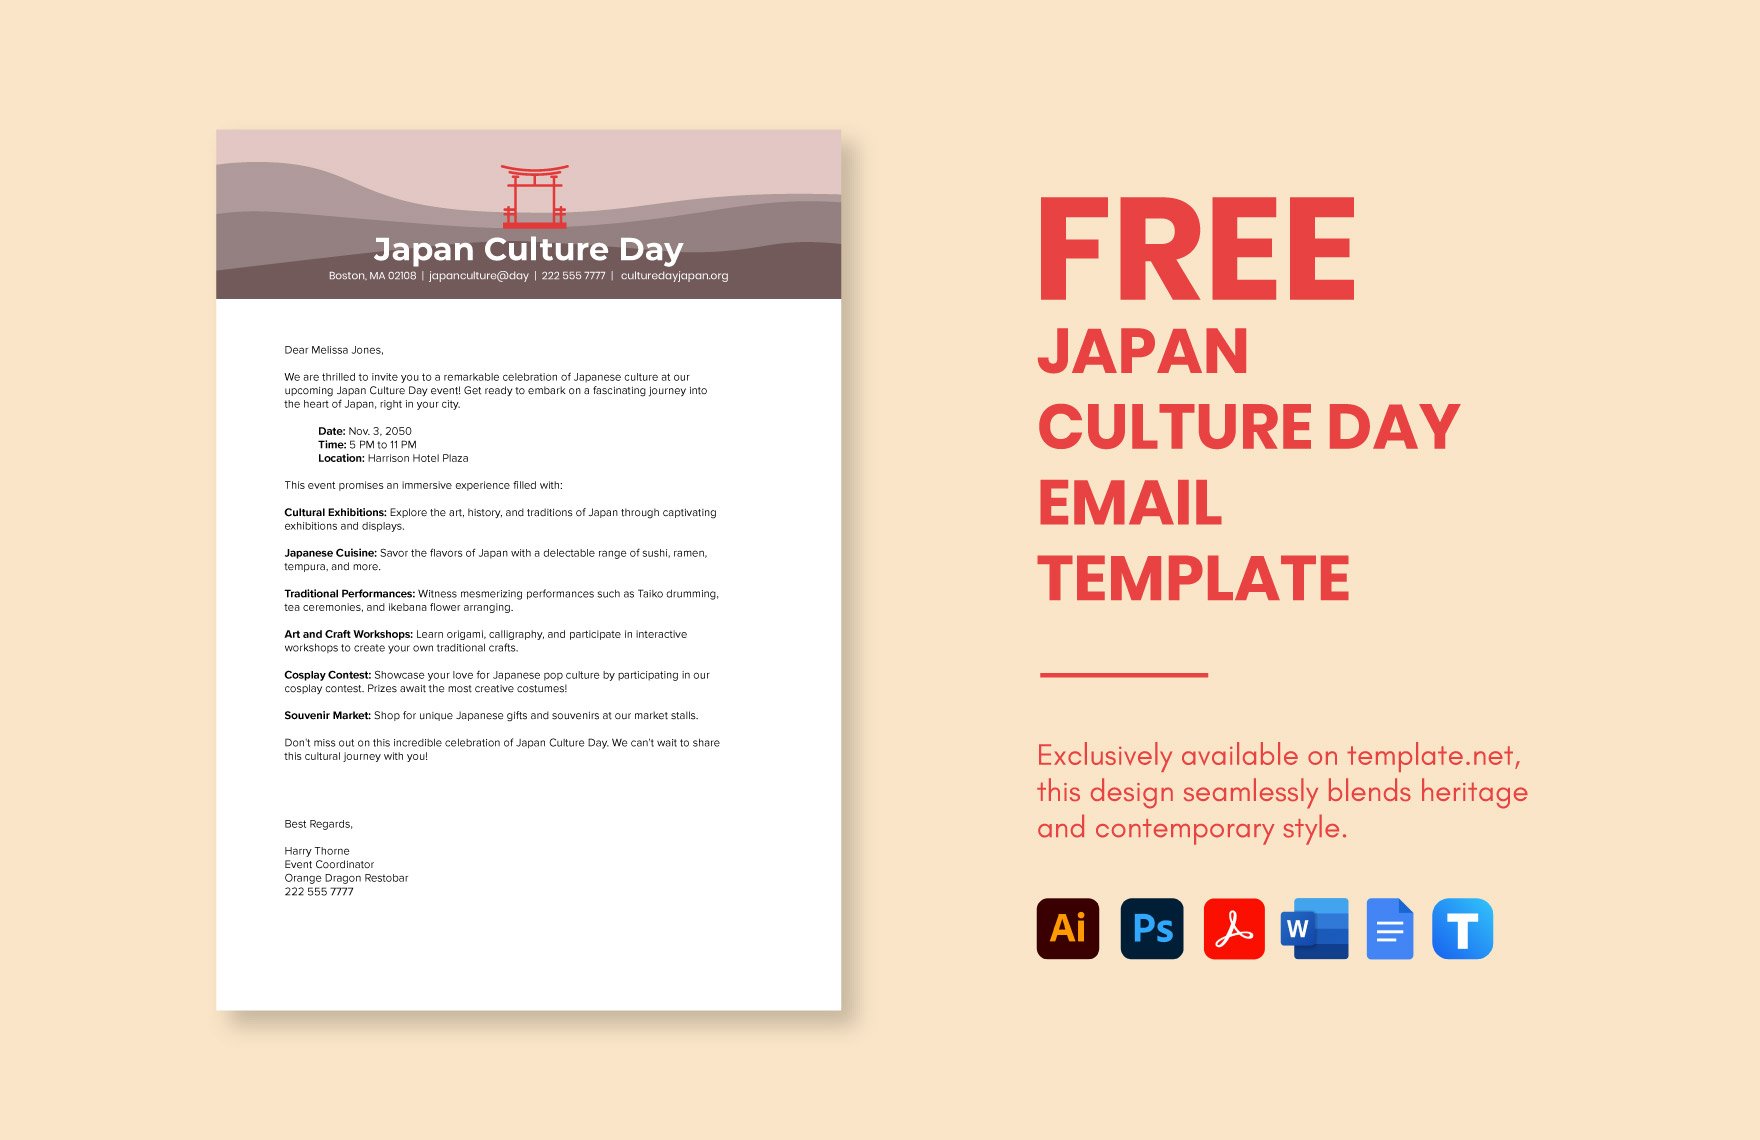 Japan Culture Day Email Template